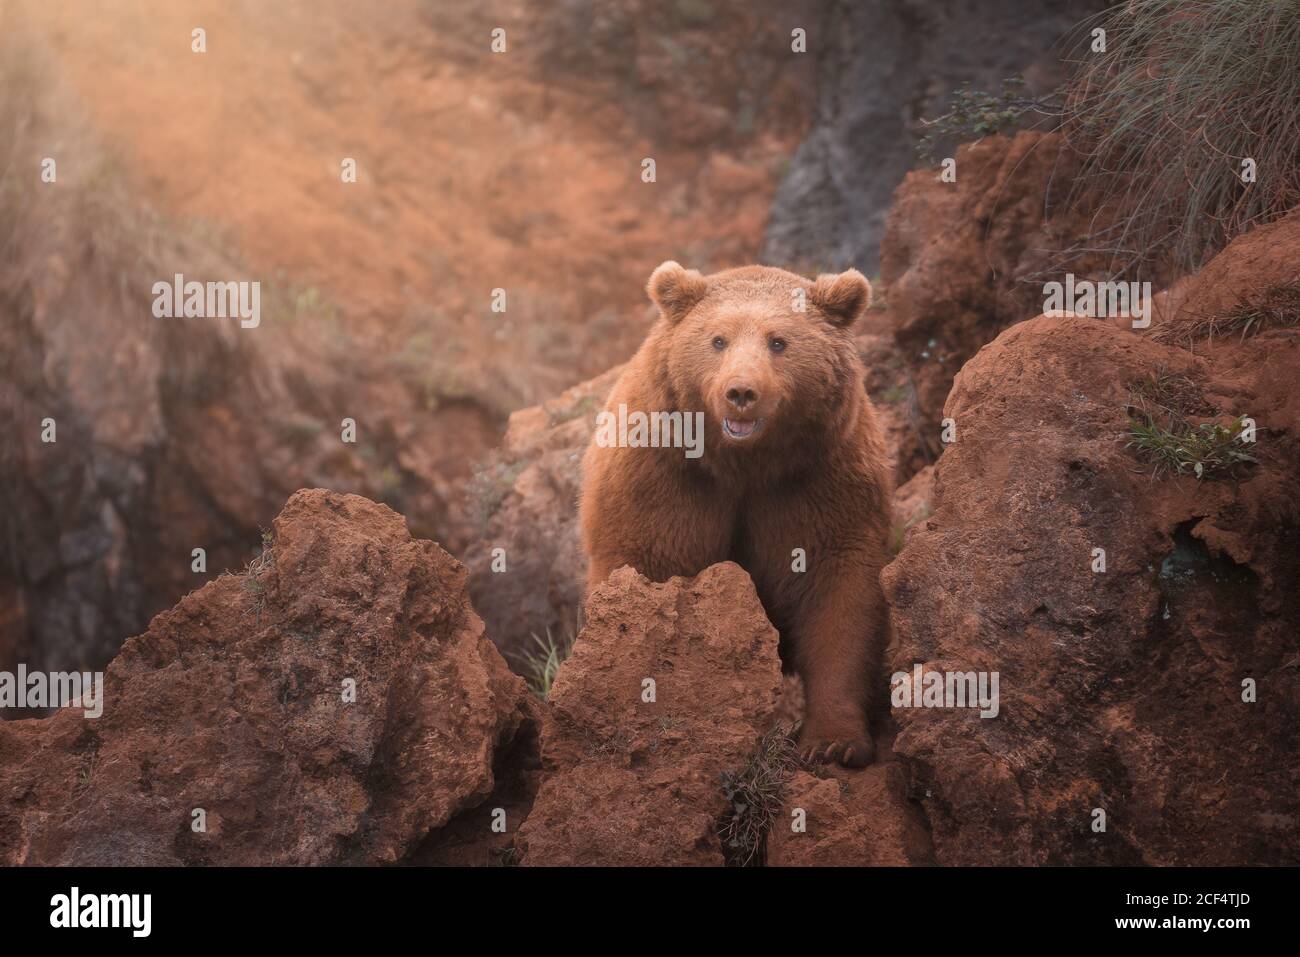 Fearsome large brown northern bear walking in red rocky terrain Stock Photo